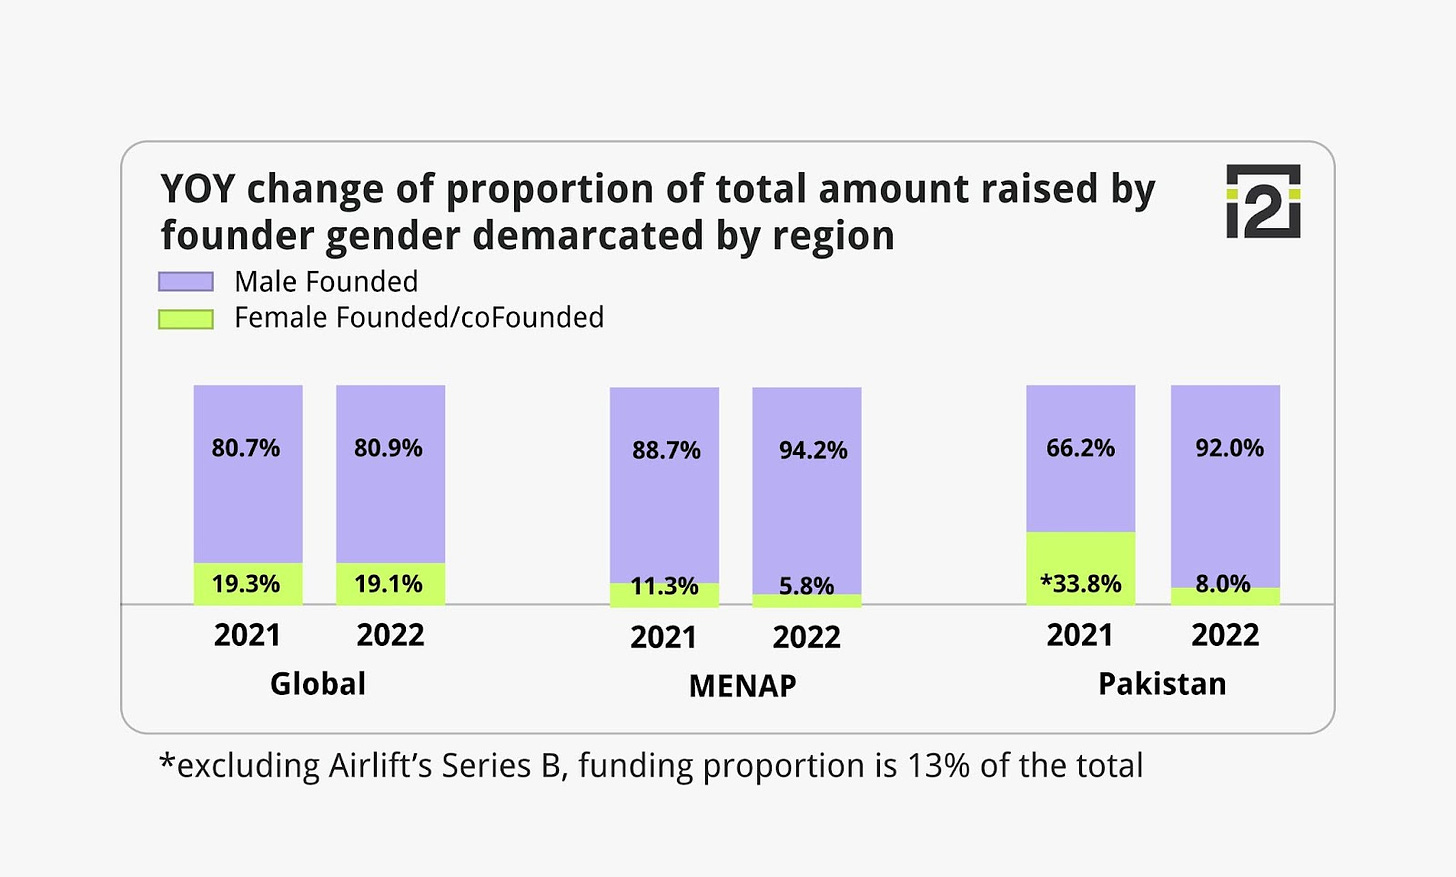 YOY proportional change in funding raised by founder gender demarcated by region, 2021 and 2022